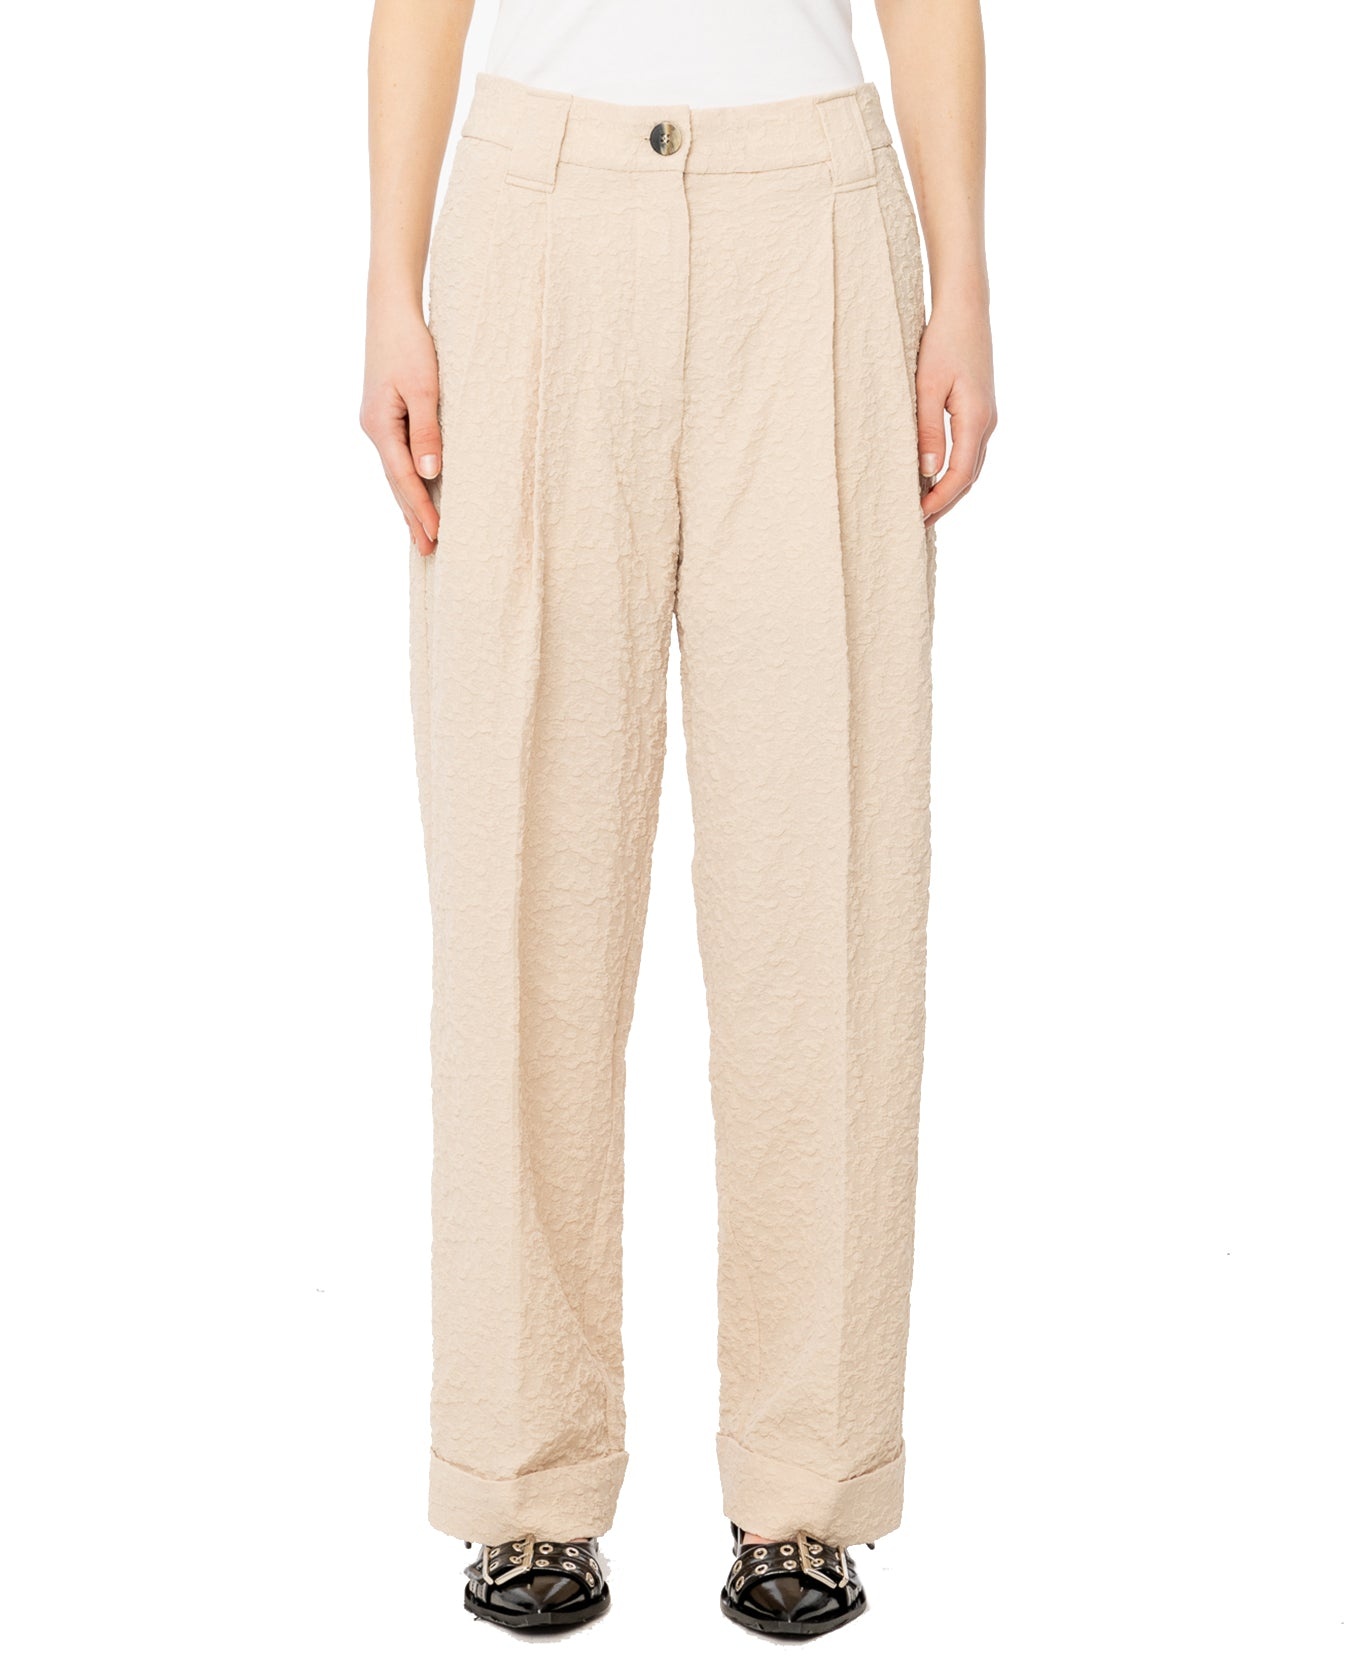 Textured Suiting Mid Waist Pants - 1